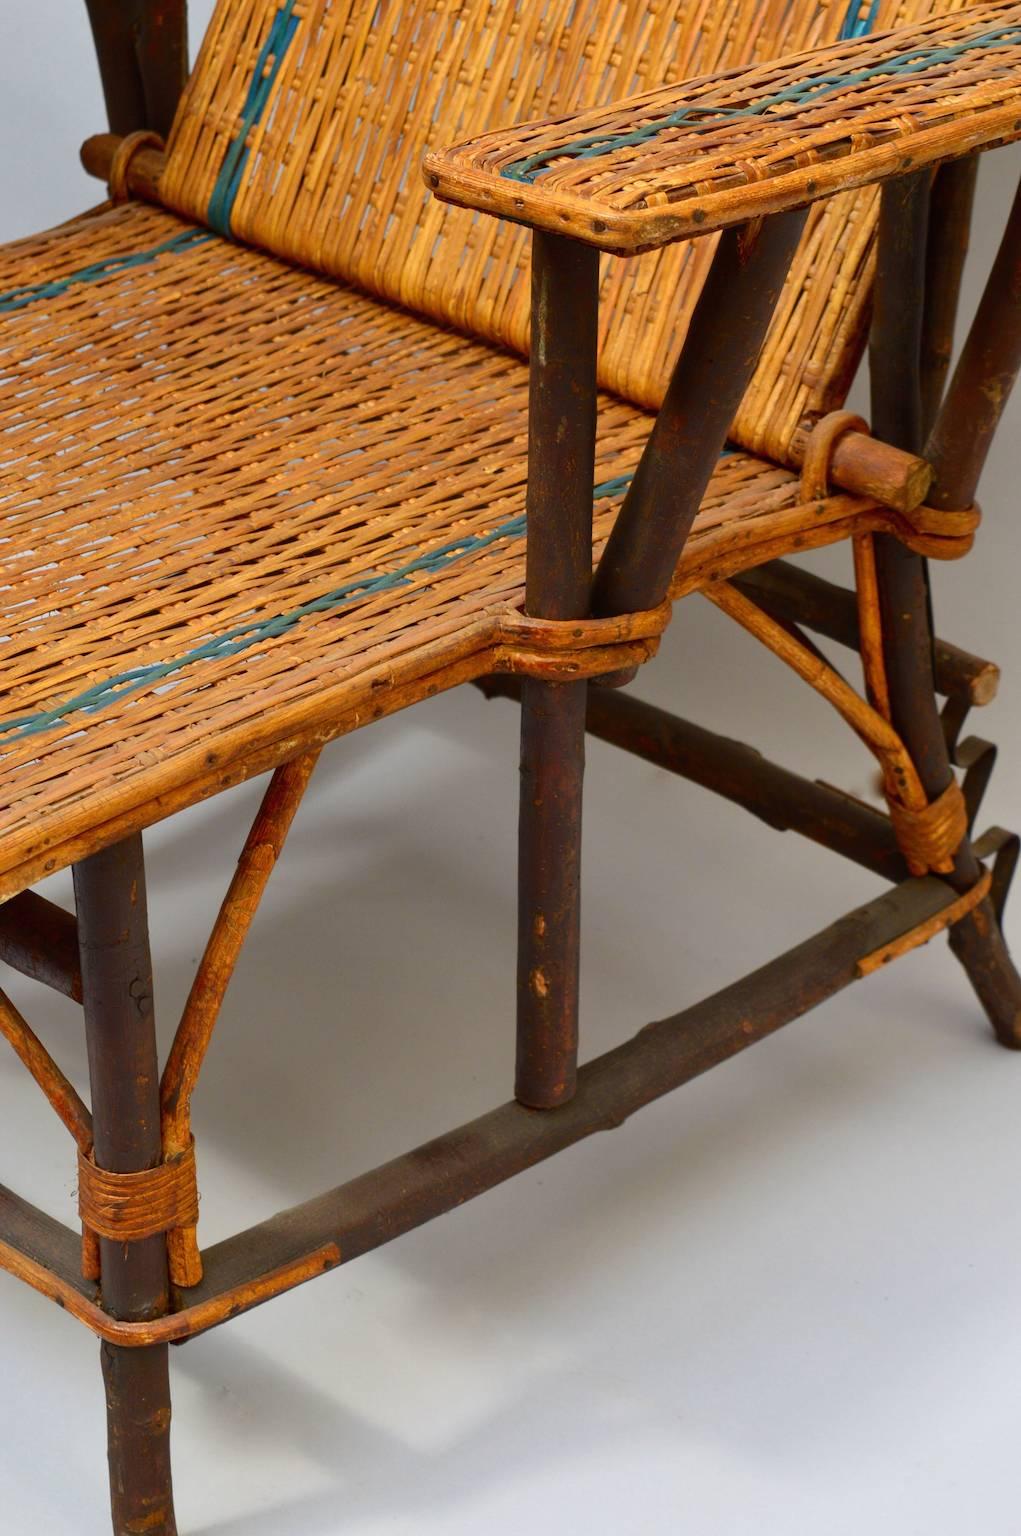 A Vintage Circa 1920 French woven rattan lounge chair with detachable footrest and adjustable back. The frame is made from twigs with smooth bark which lends special one of a kind character only found in a handmade piece.
The ultimate in chic lounge